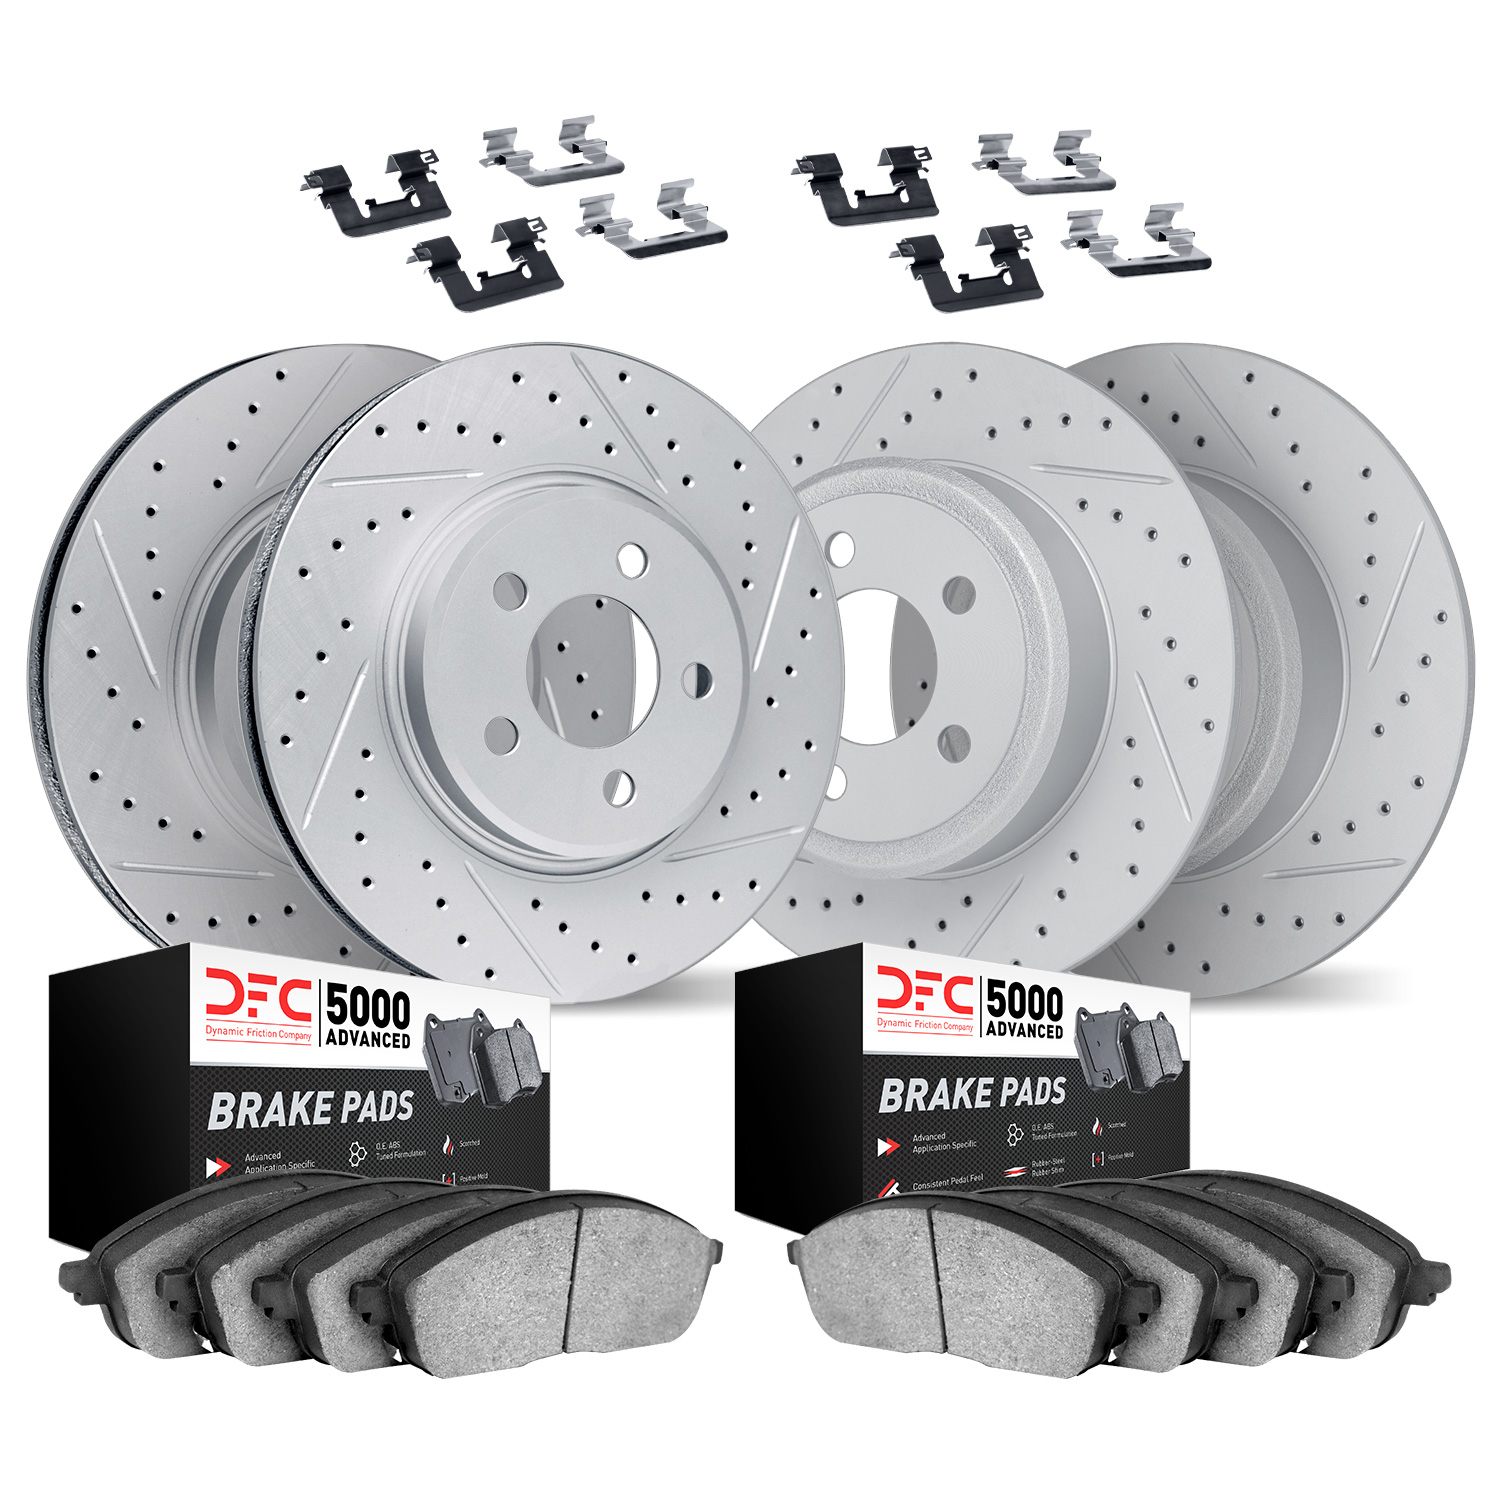 2514-45025 Geoperformance Drilled/Slotted Rotors w/5000 Advanced Brake Pads Kit & Hardware, 2011-2017 GM, Position: Front and Re